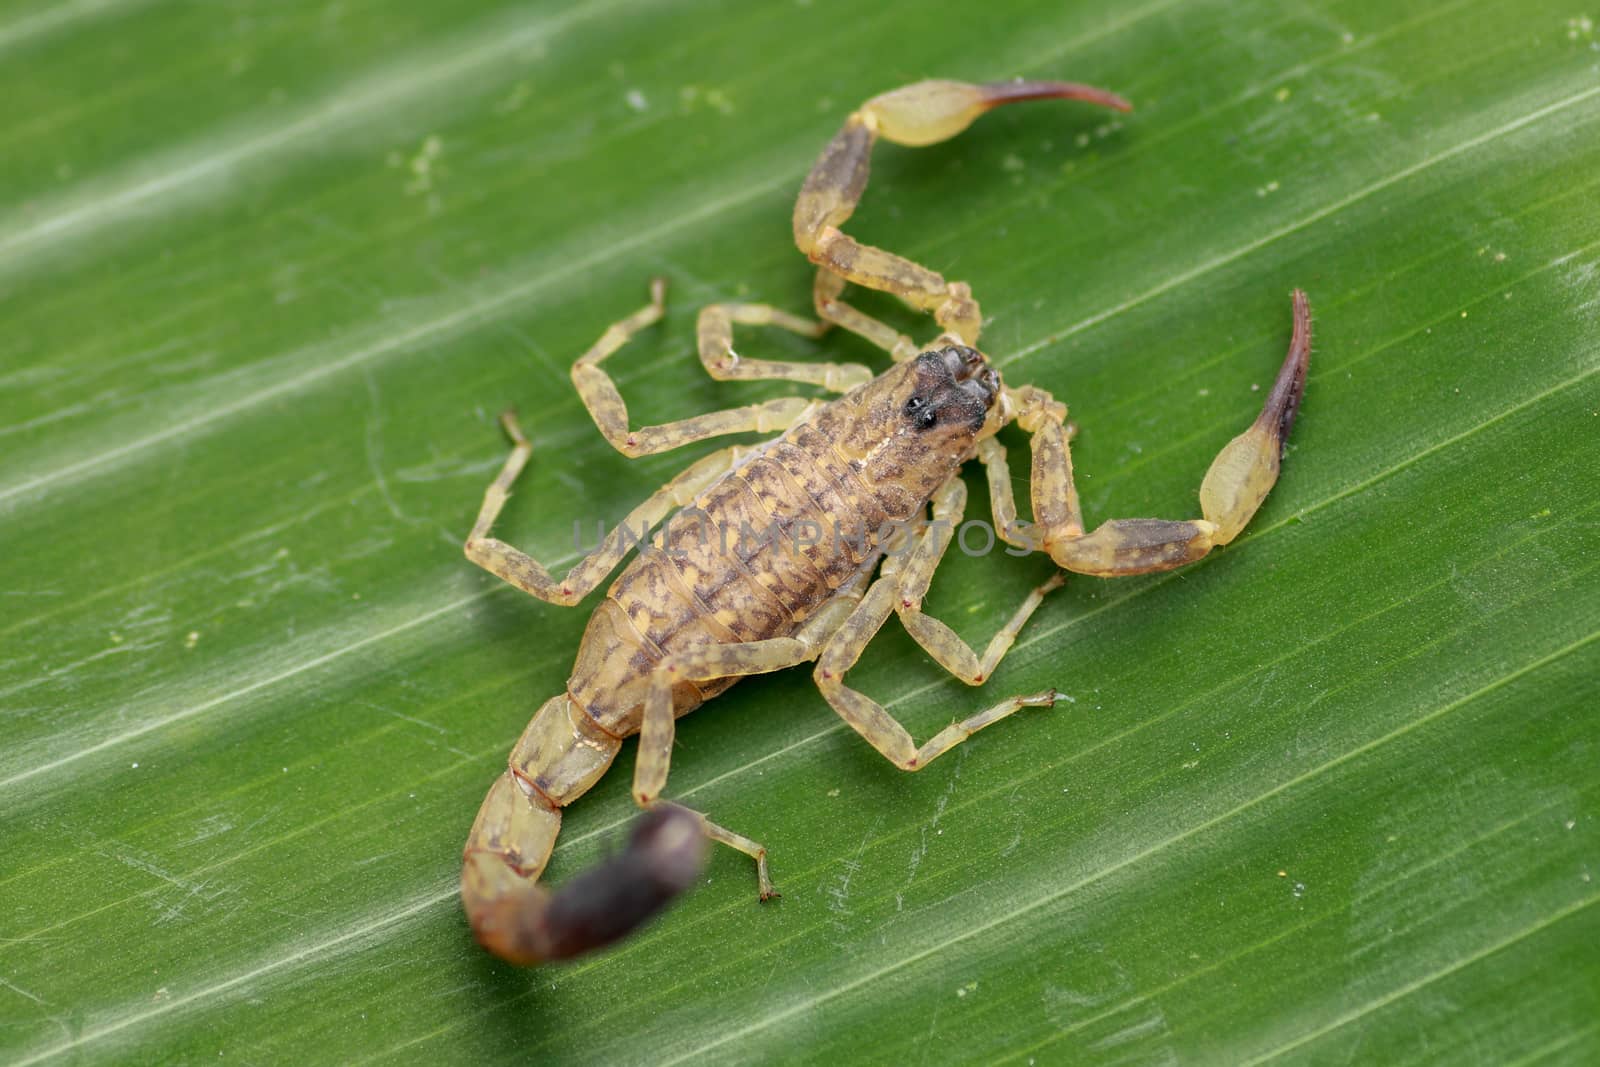 Top view venomous scorpion Lychas mucronatus in nature. Swimming Scorpion, Chinese swimming scorpion or Ornate Bark Scorpion on a leaf in a tropical jungle.